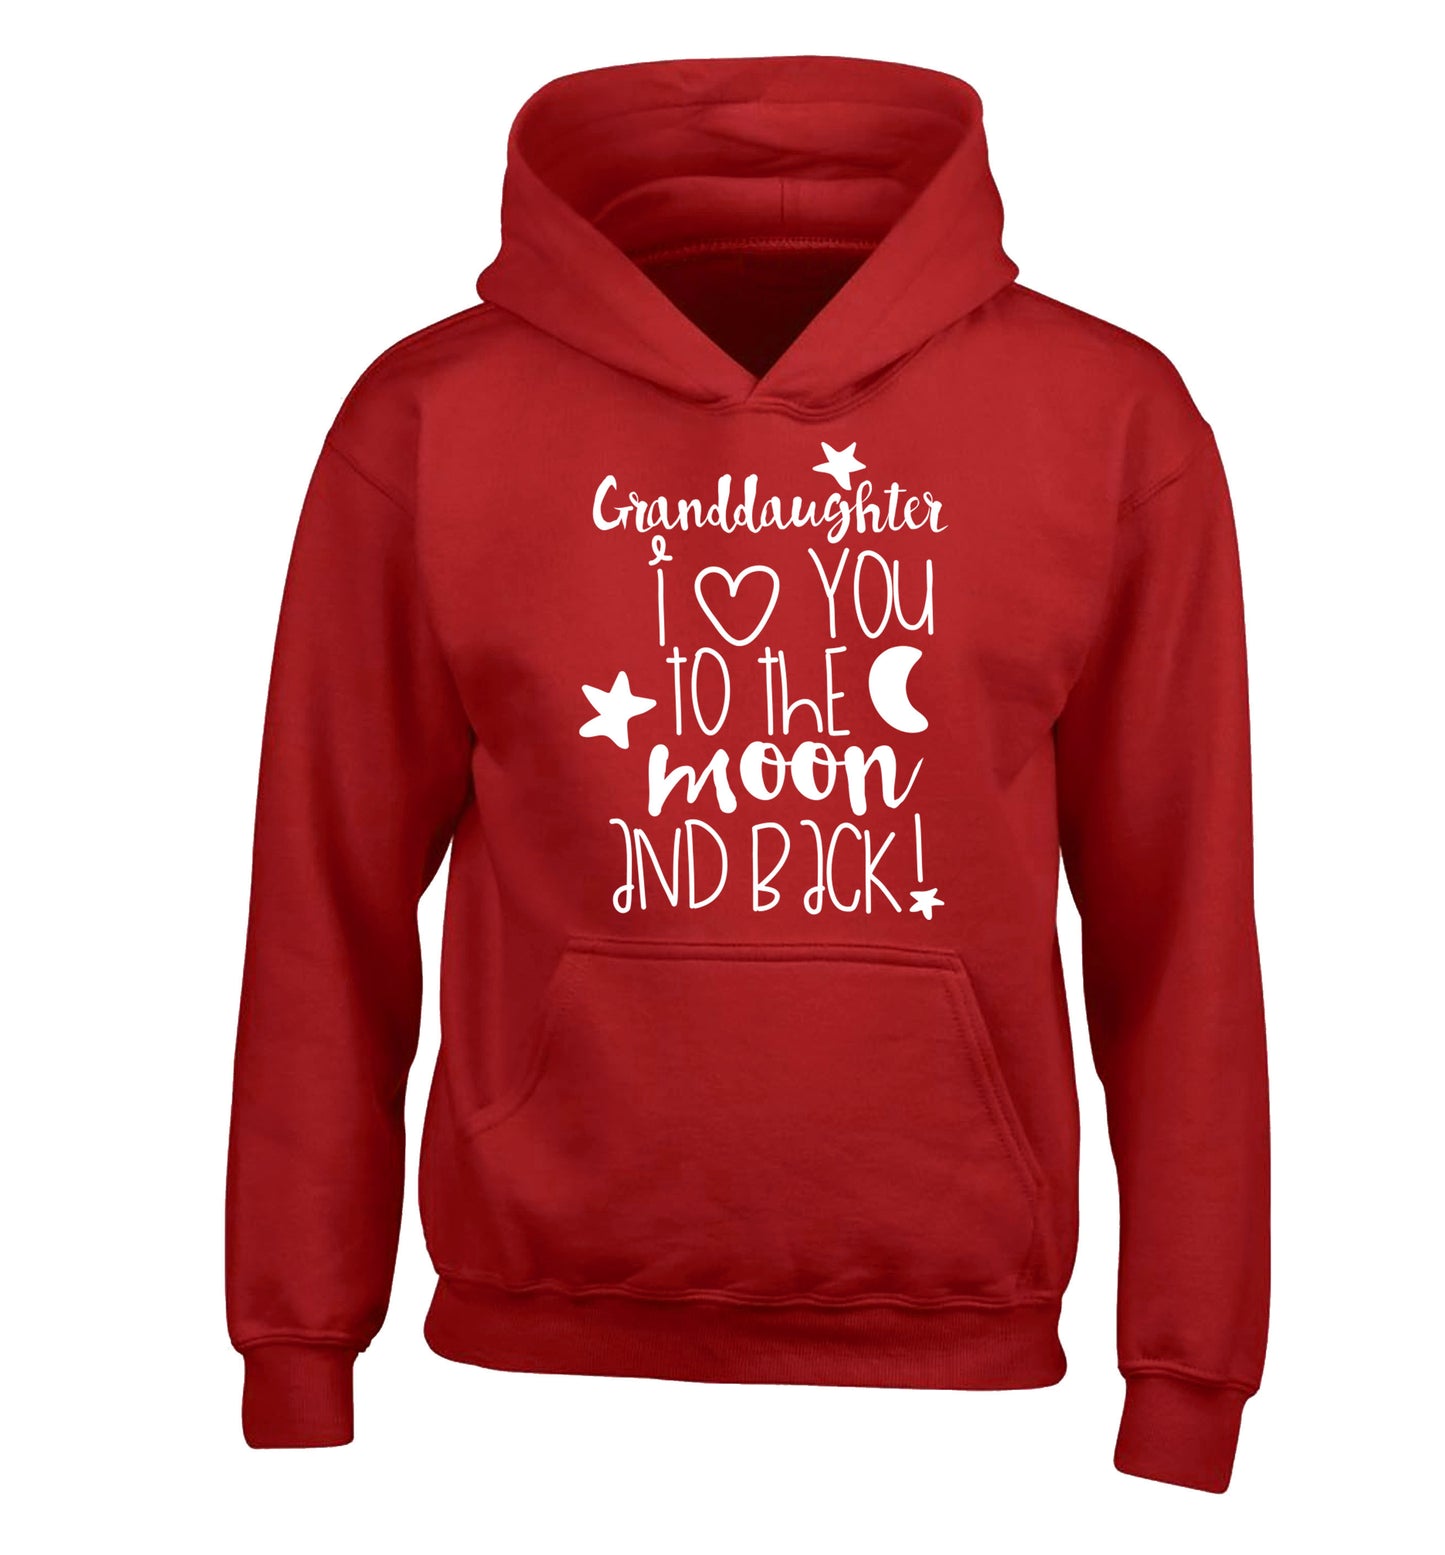 Granddaughter I love you to the moon and back children's red hoodie 12-14 Years